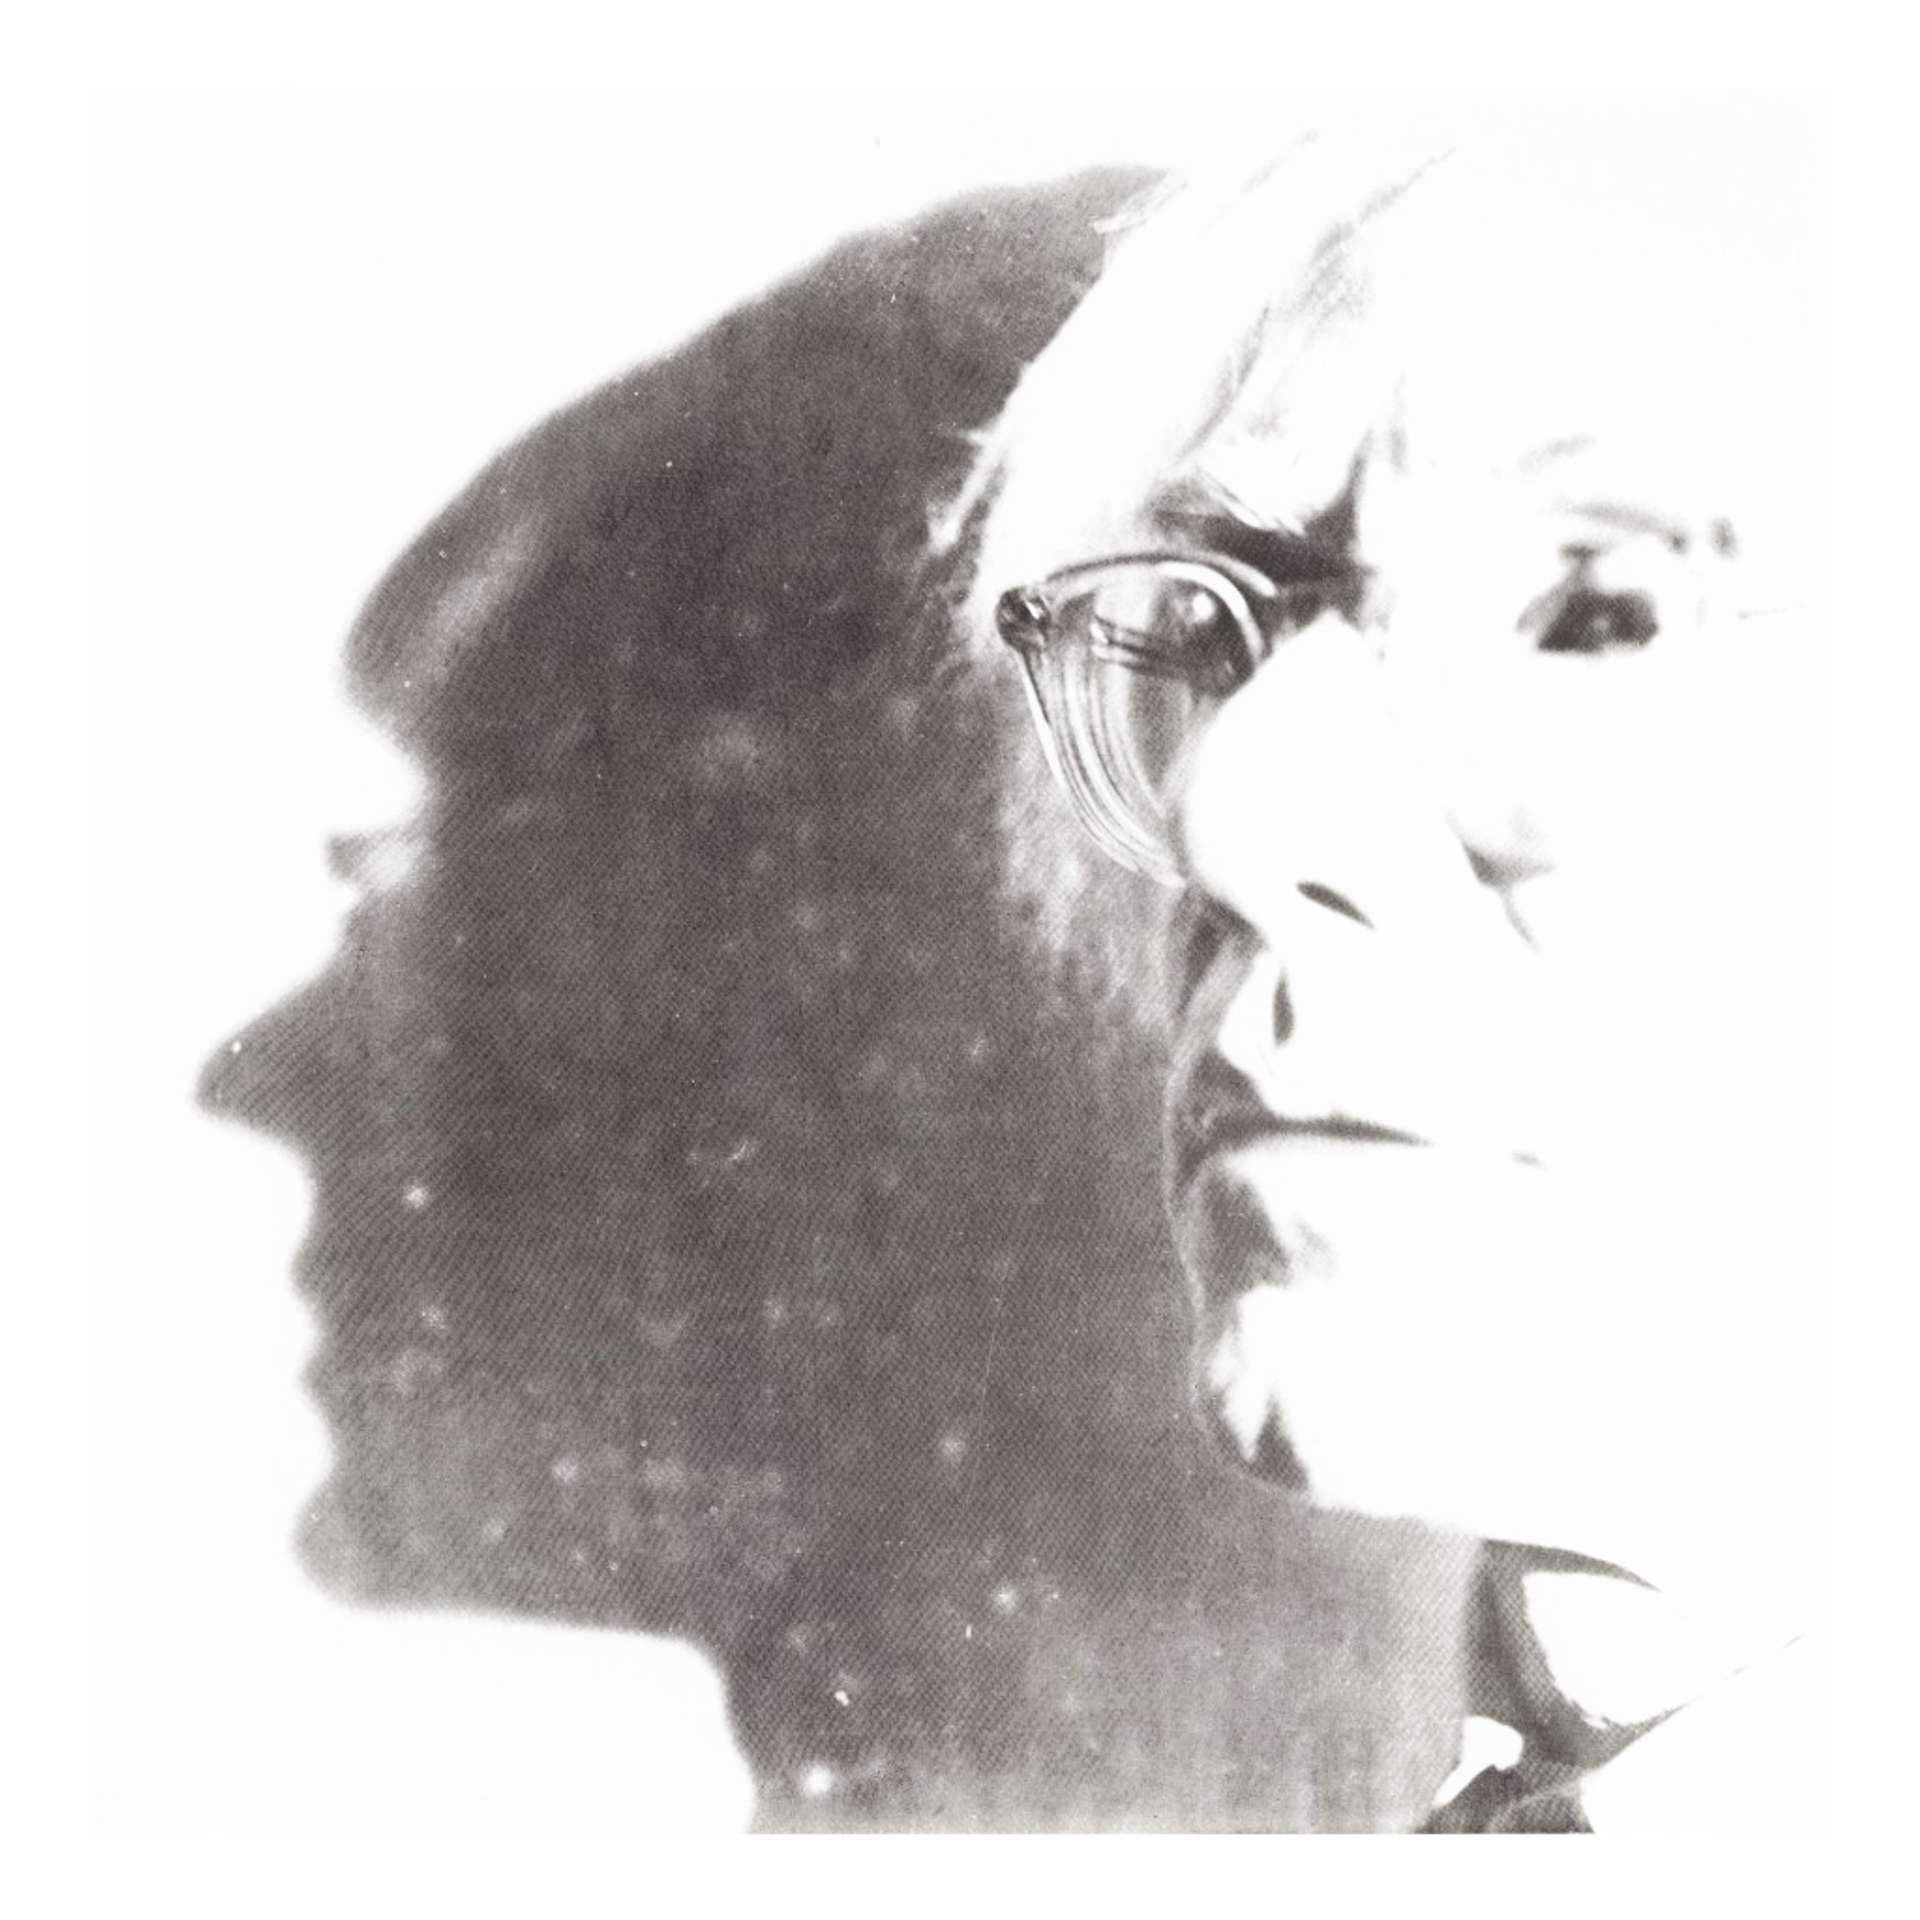 The Shadow (unique) by Andy Warhol